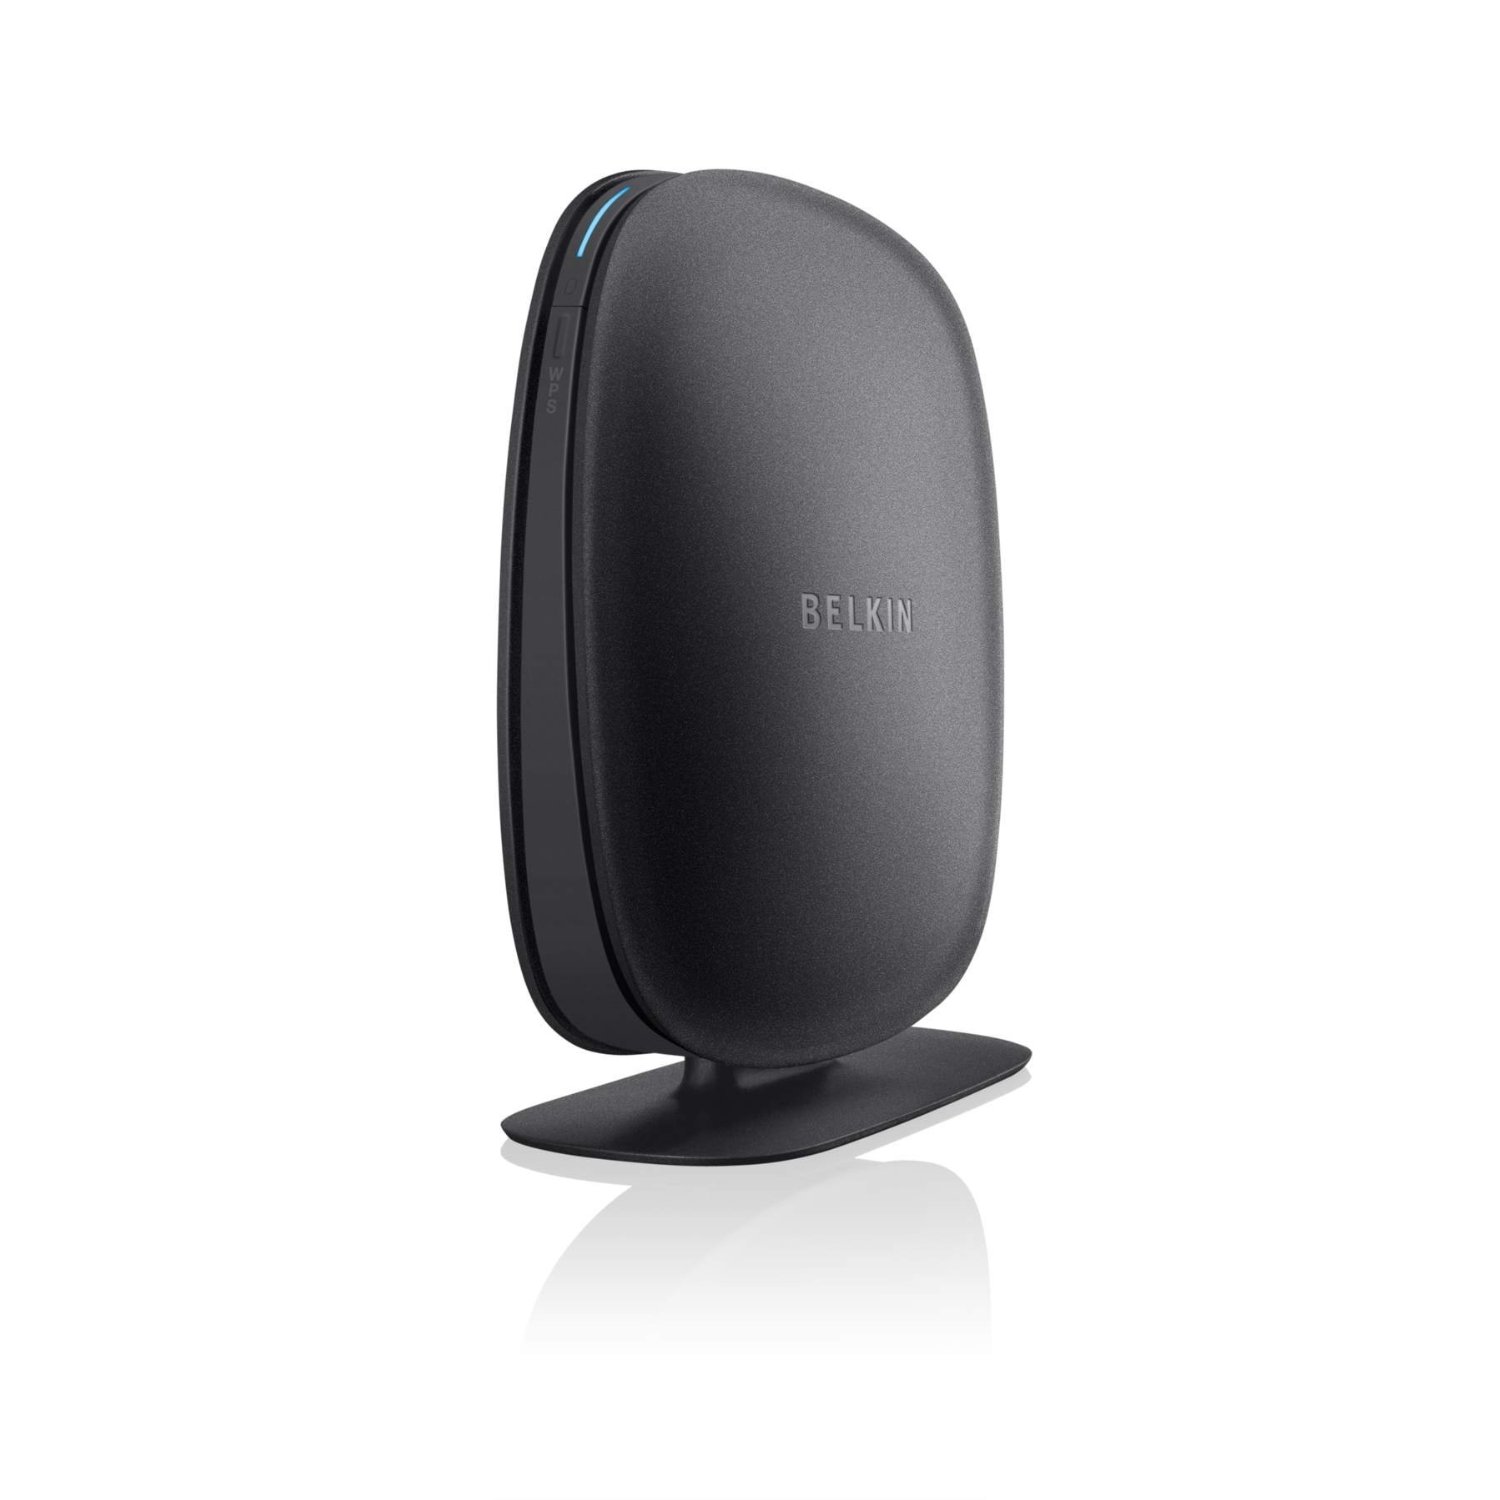 http://thetechjournal.com/wp-content/uploads/images/1108/1314410232-belkin-n150-latest-generation-wireless-n-router-1.jpg